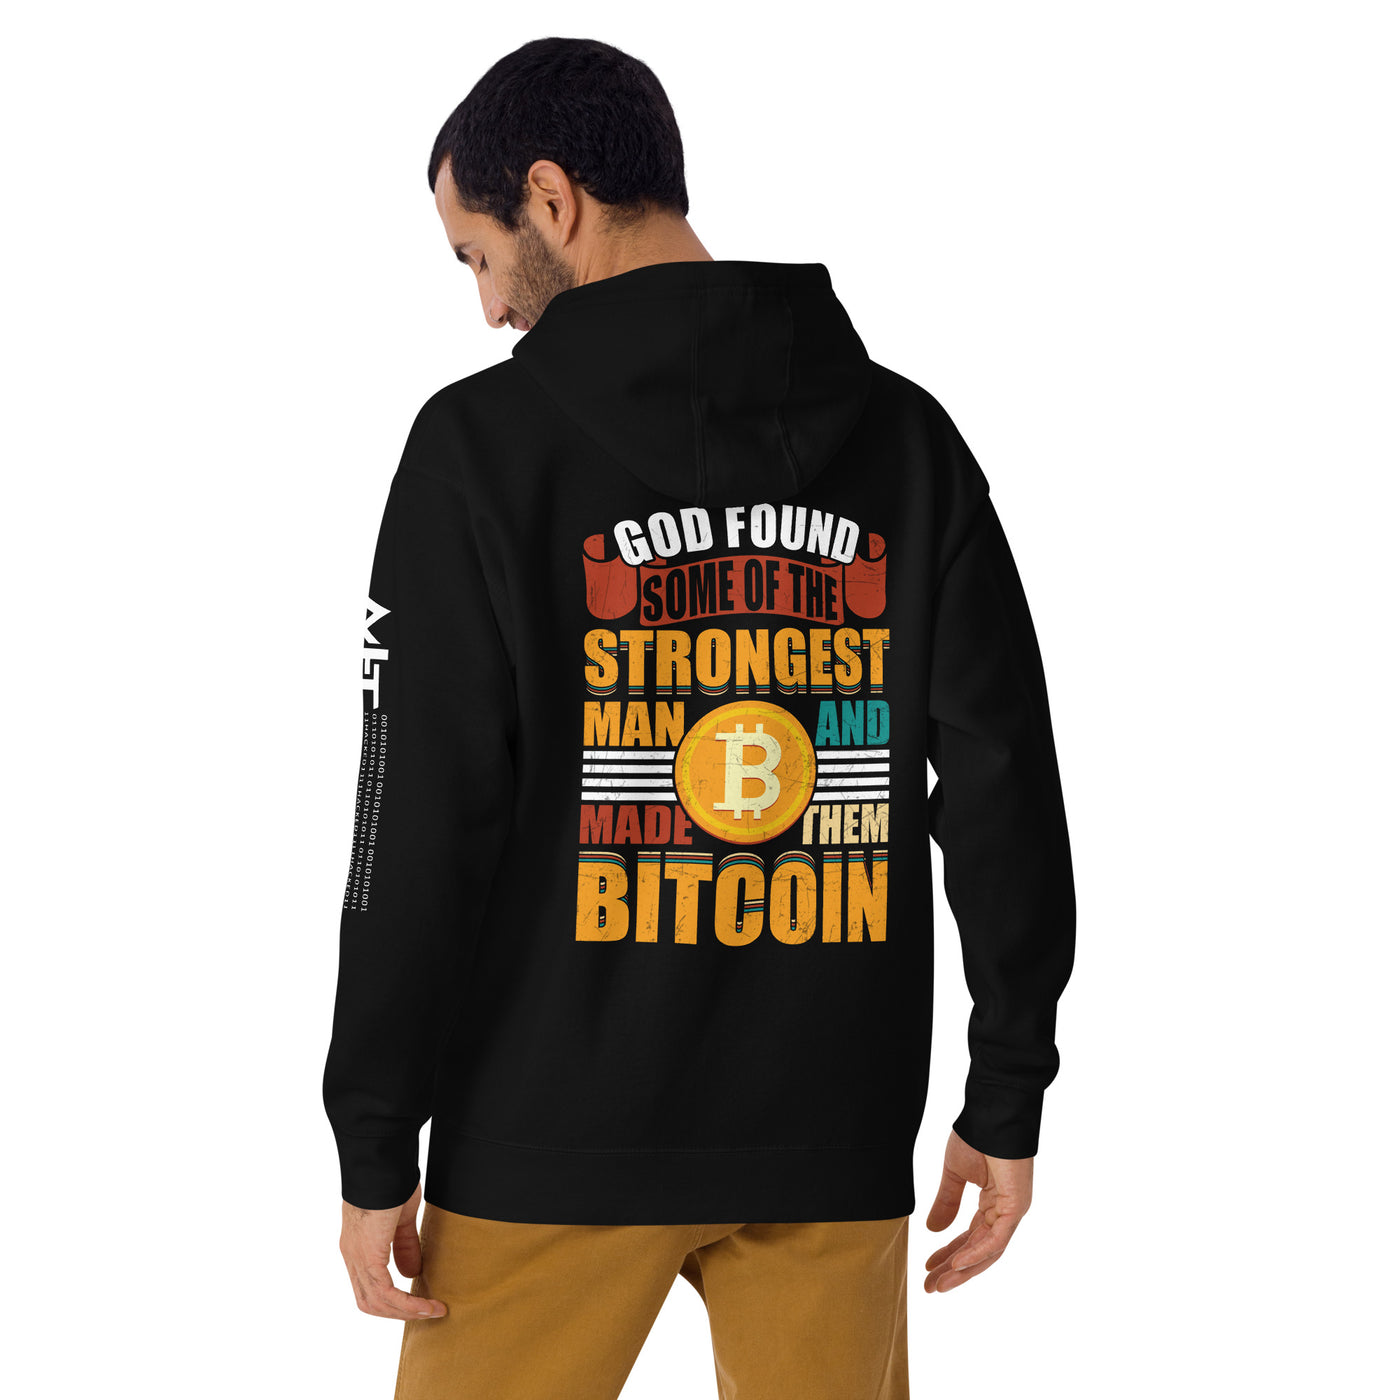 God Found Some of the Strongest Man and Made them Bitcoin - Unisex Hoodie ( Back Print )